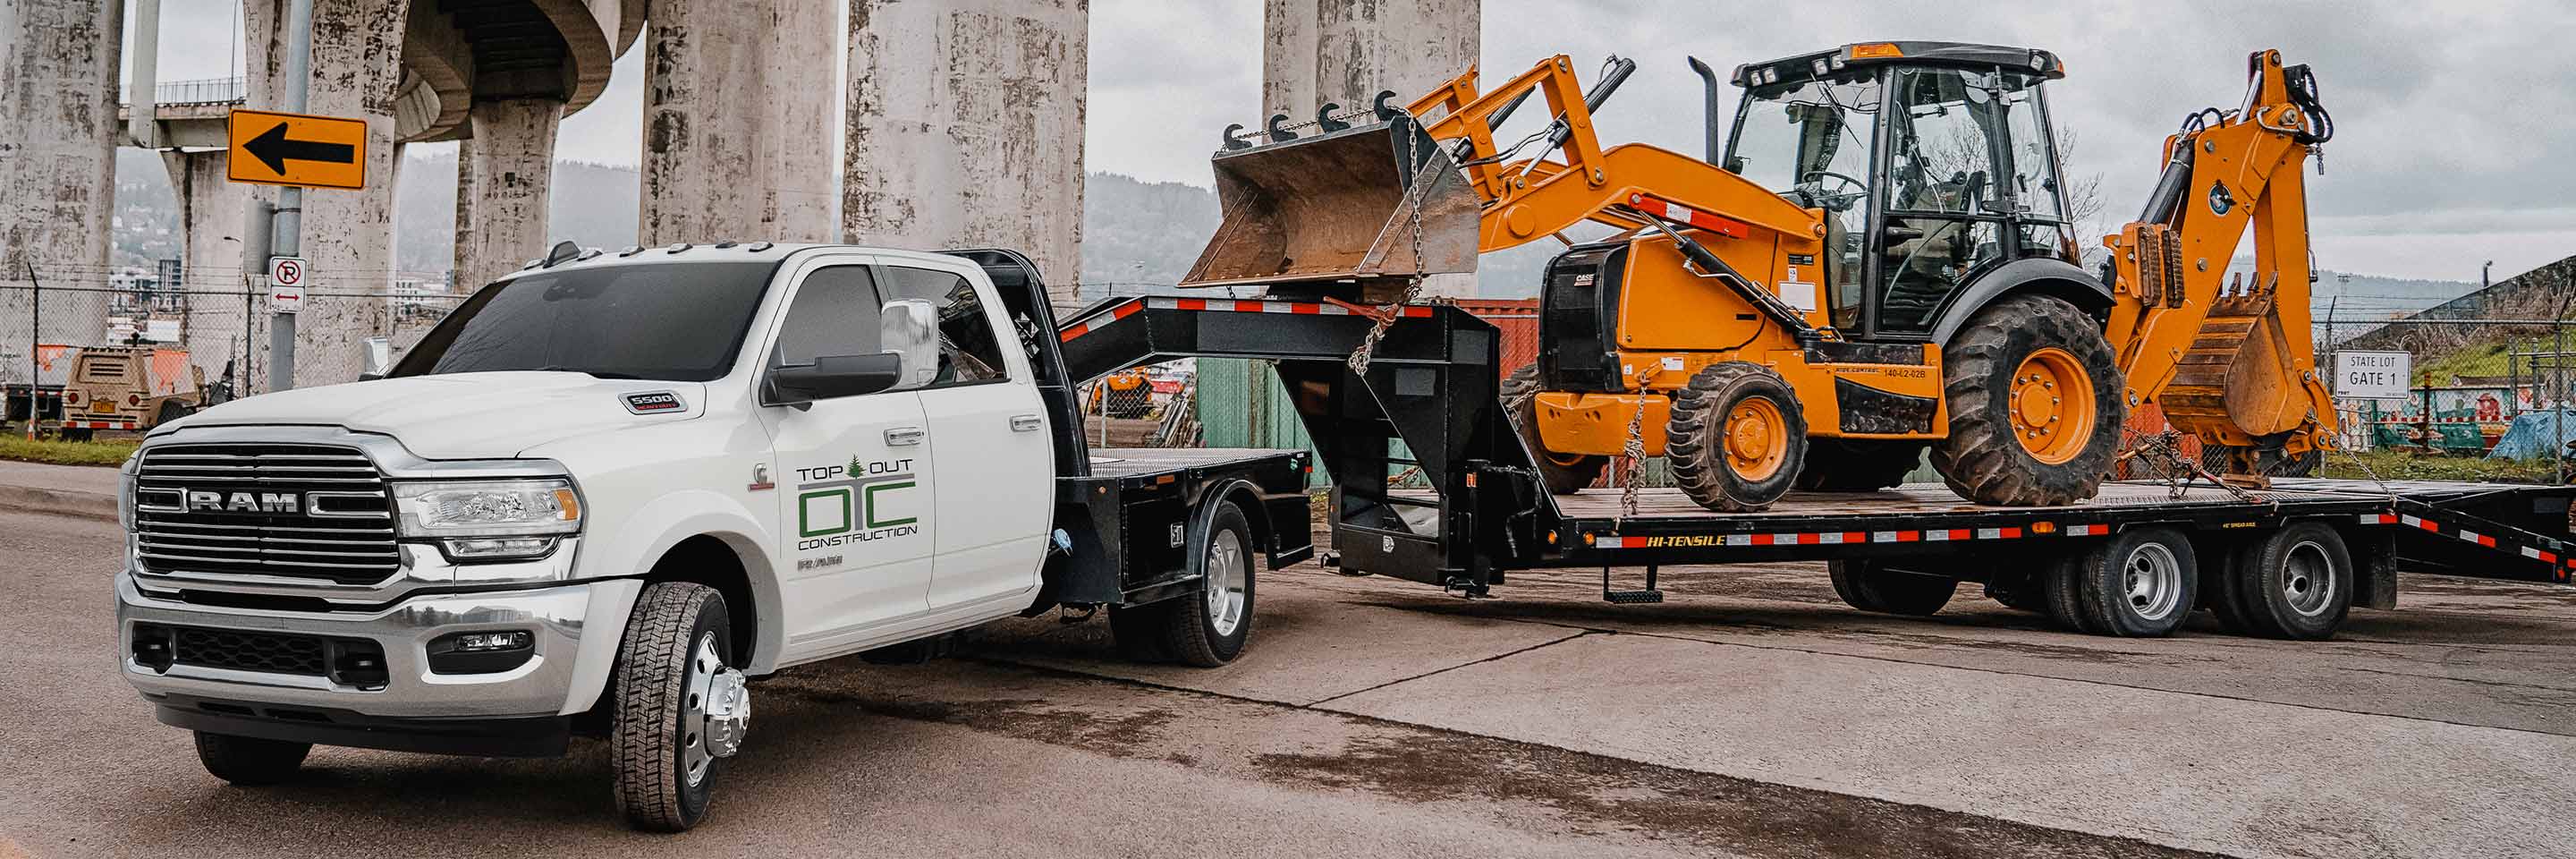 The 2022 Ram Chassis Cab towing a flatbed trailer loaded with an excavator.